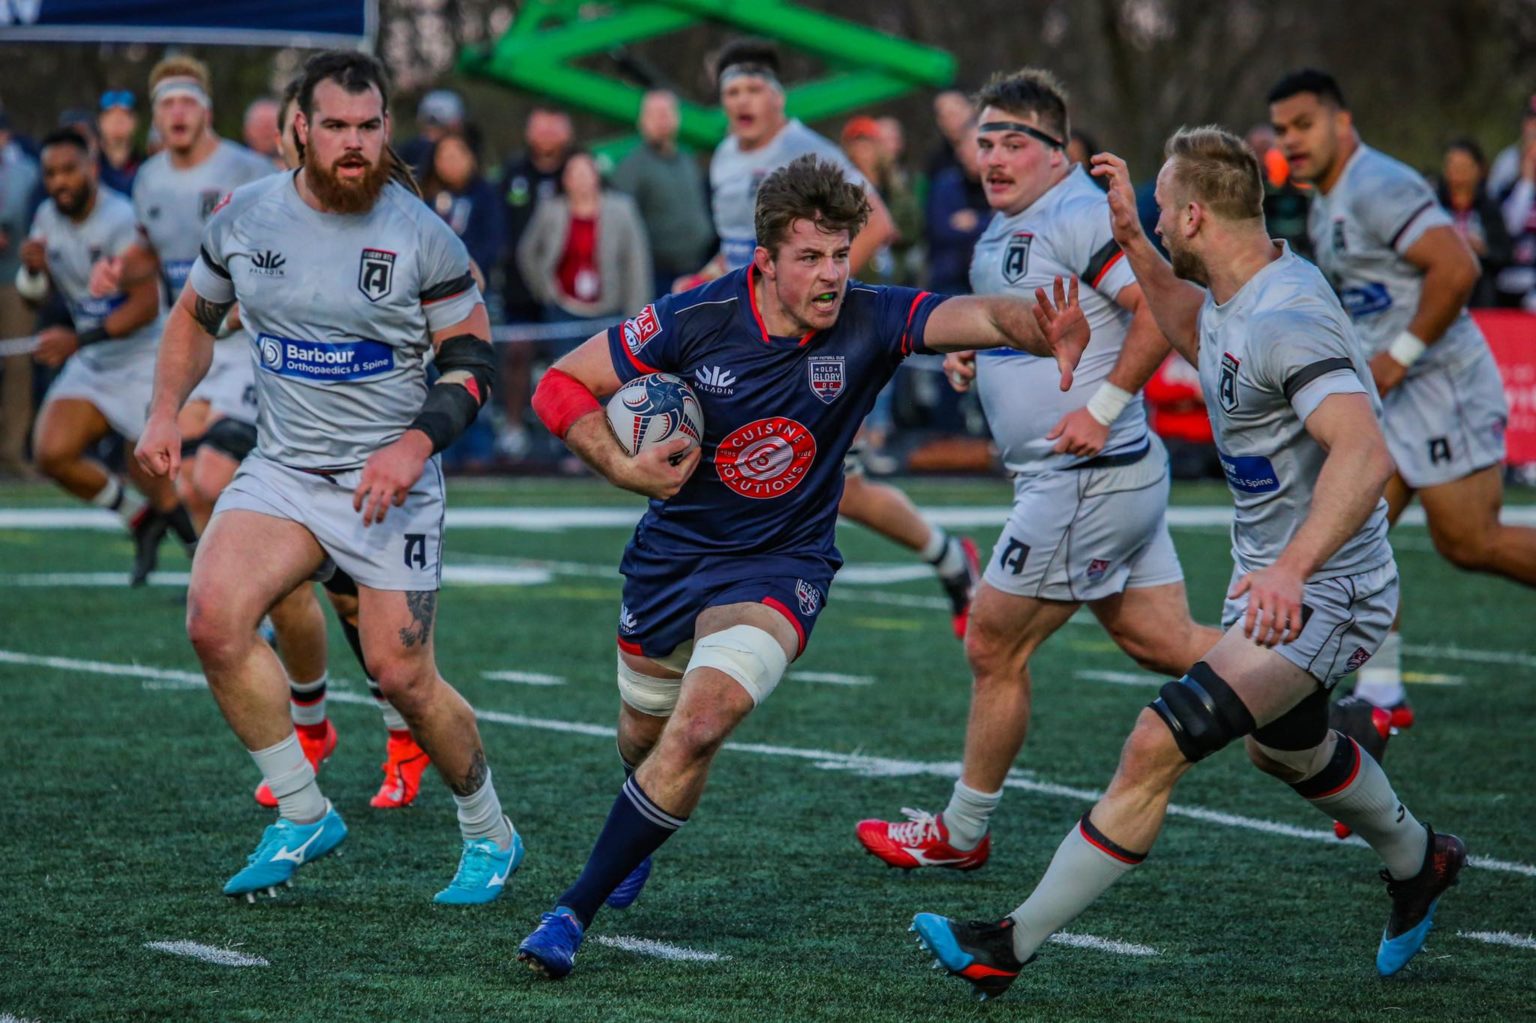 Major League Rugby Team Has New Home At Loudouns Segra Field The Burn